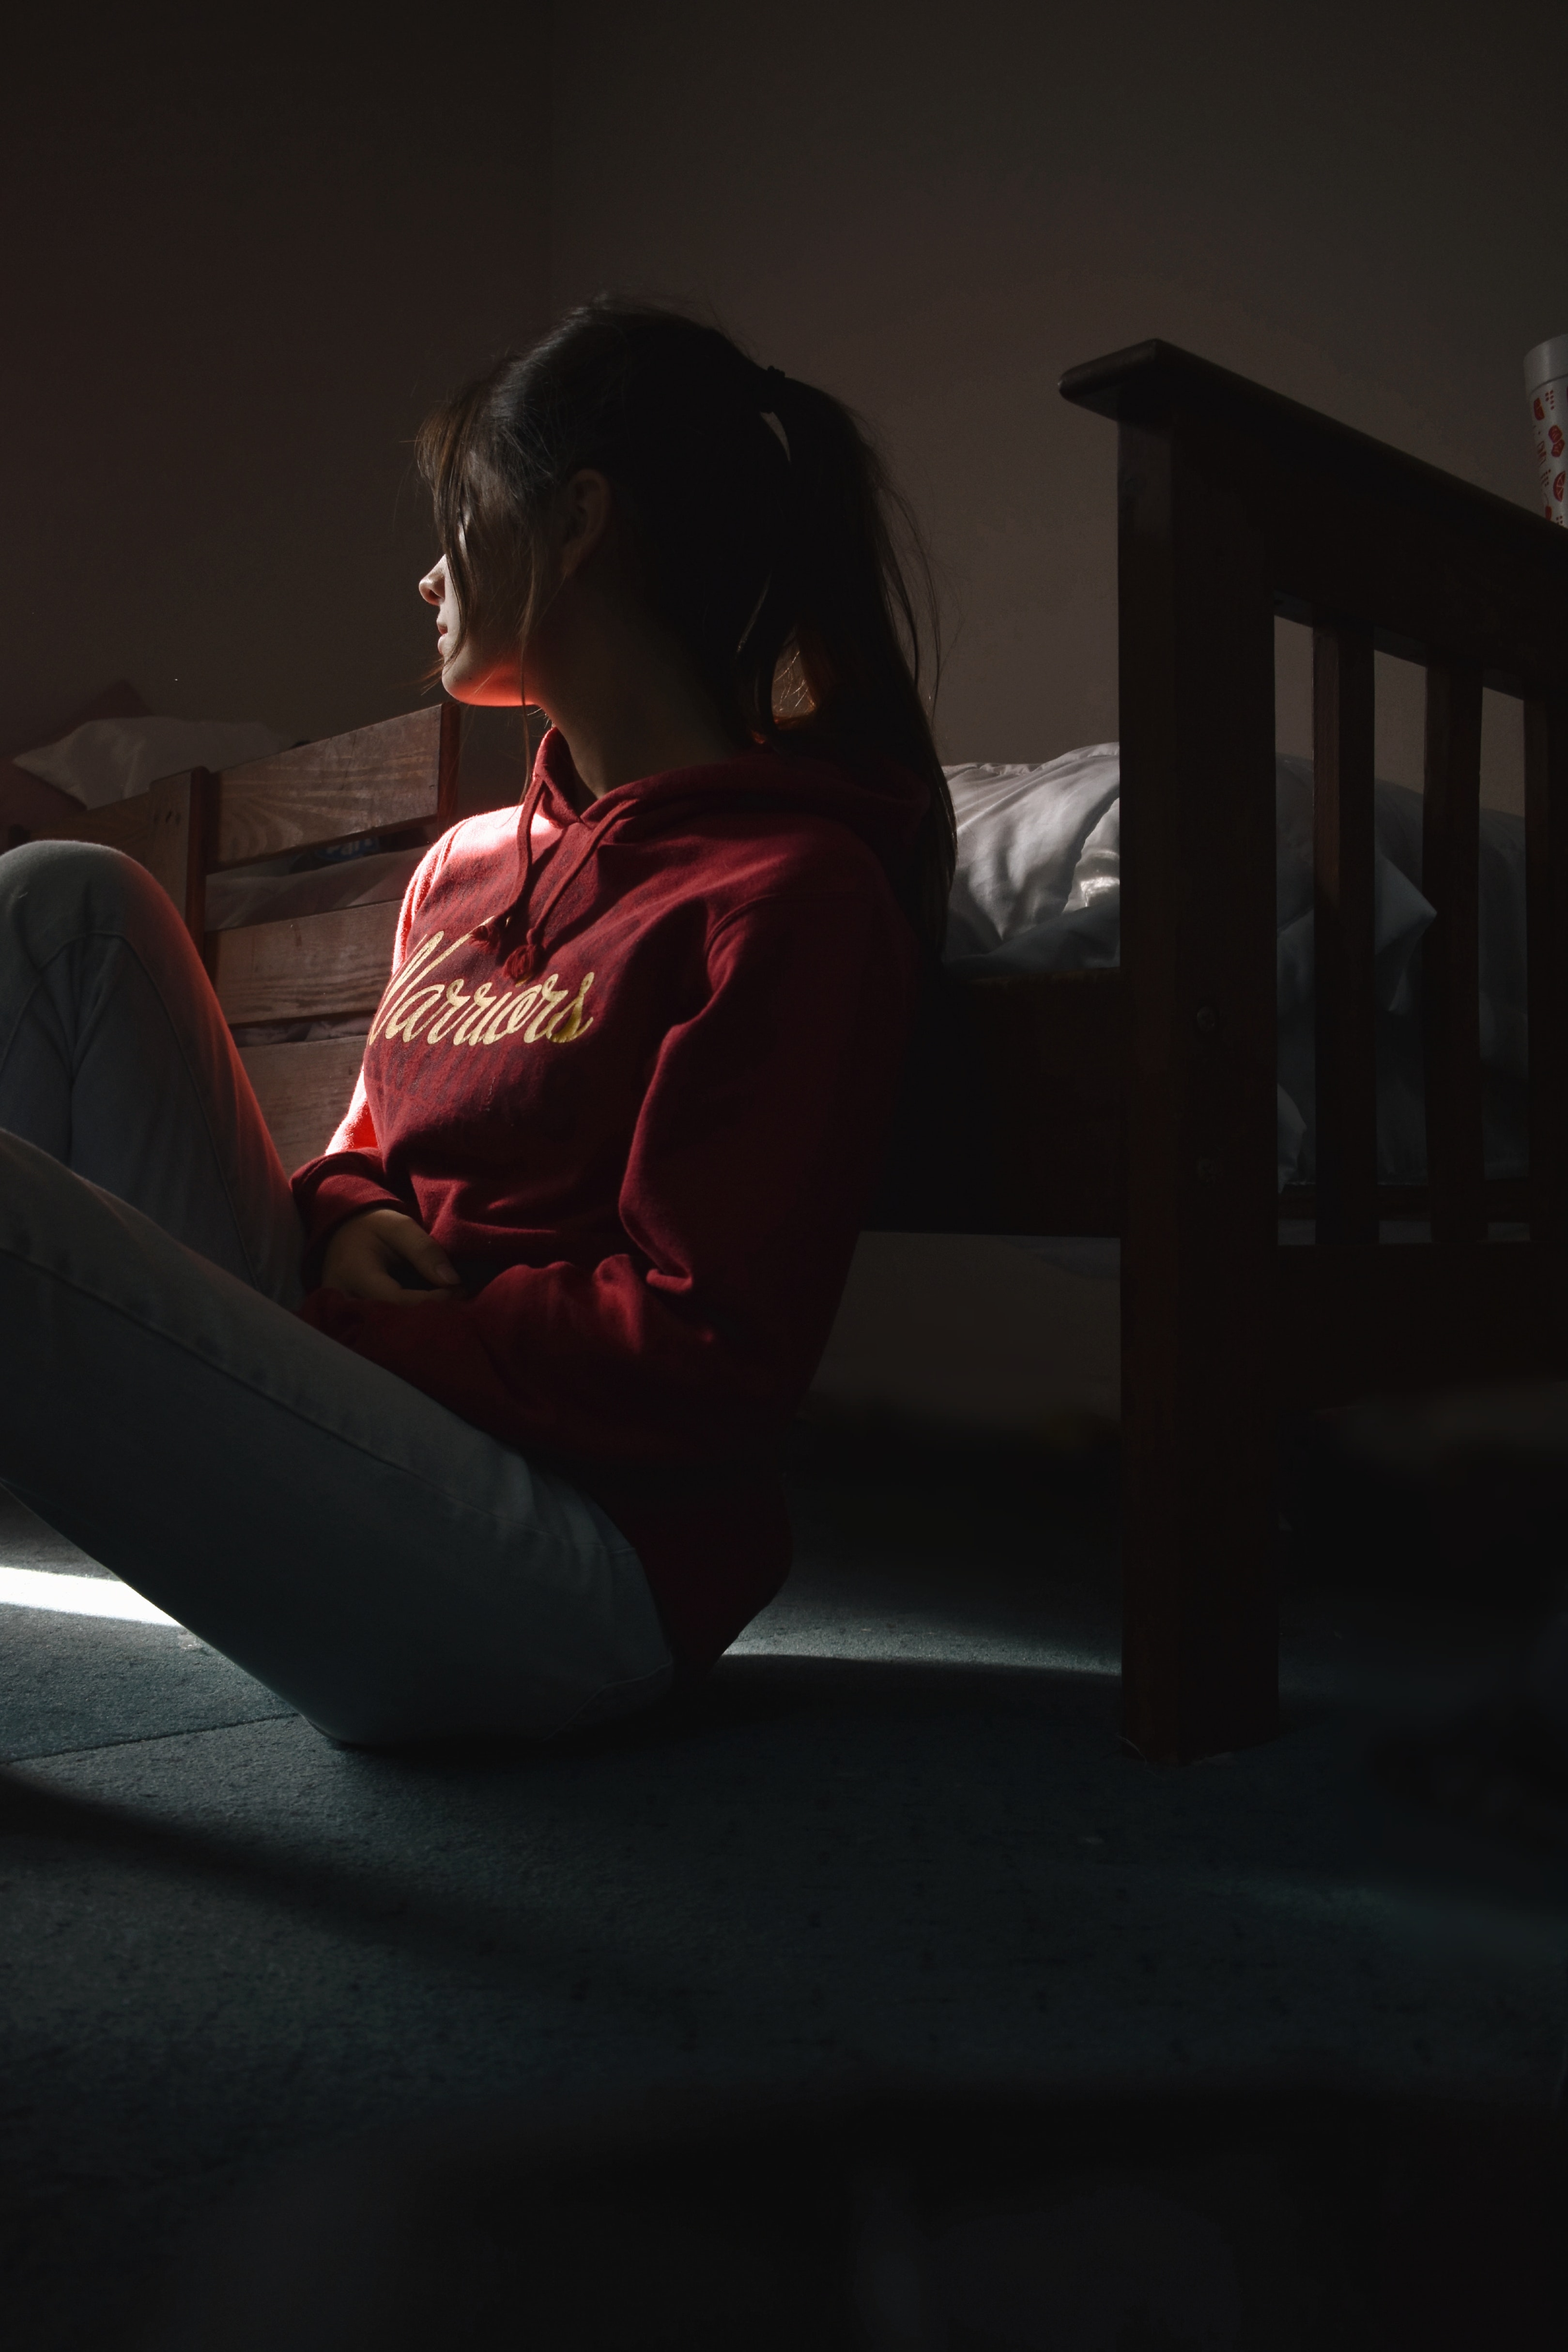 A woman sitting on her bedroom floor looking to one side | Source: Pexels